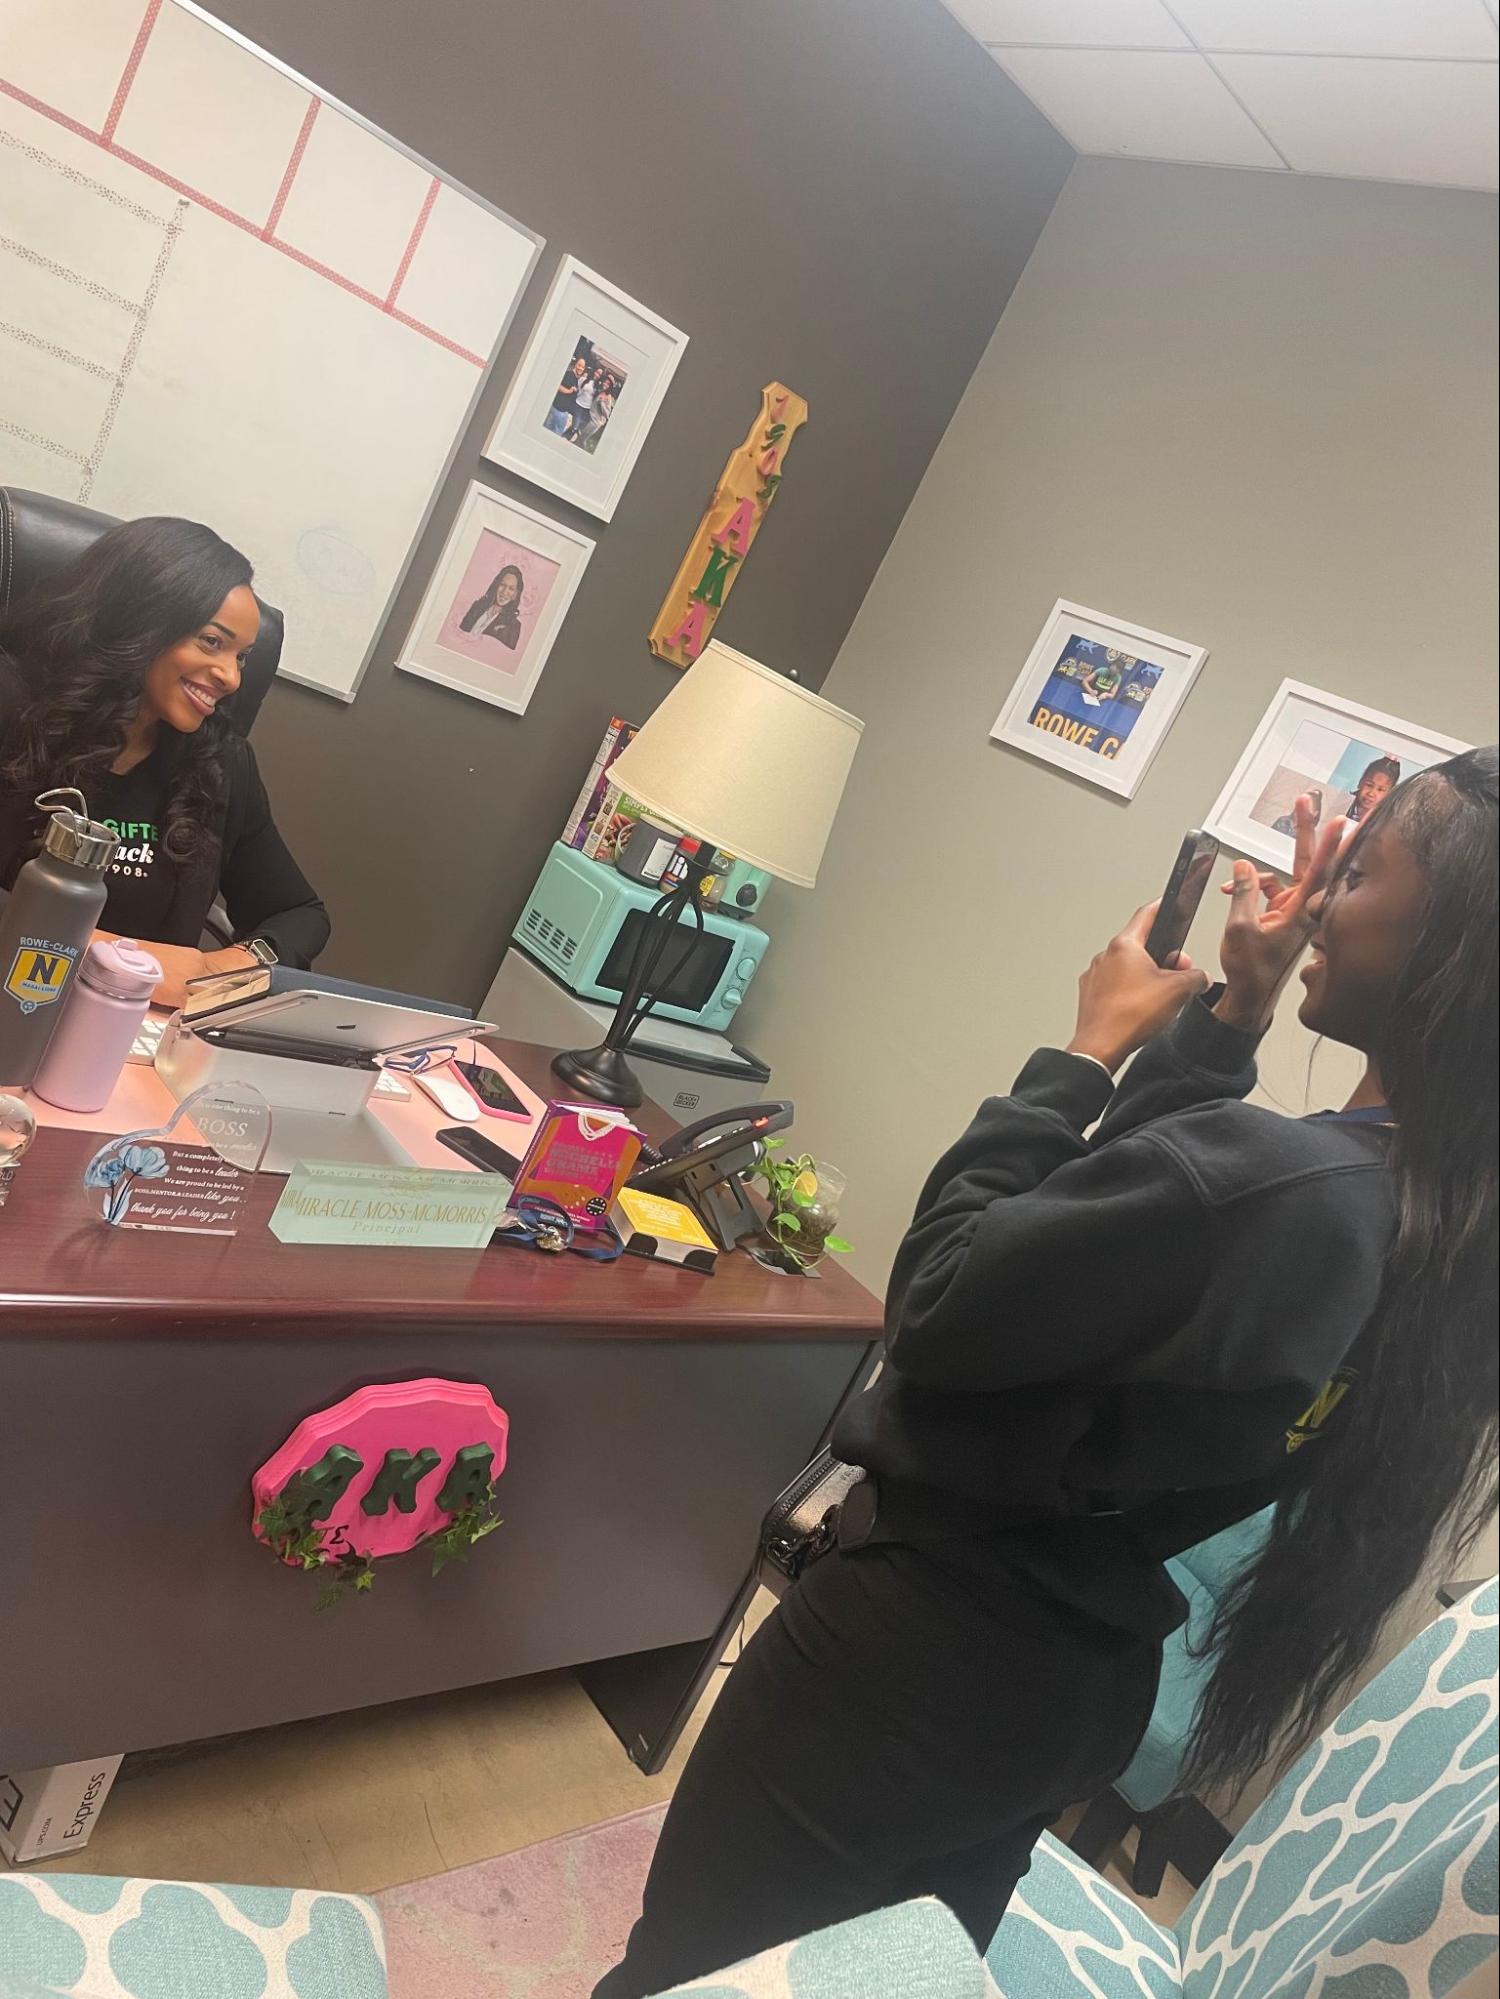 Makya stands in front of the principal's desk with a phone out. She is taking a picture of Principal Moss sitting and smiling at her desk for a social media post.